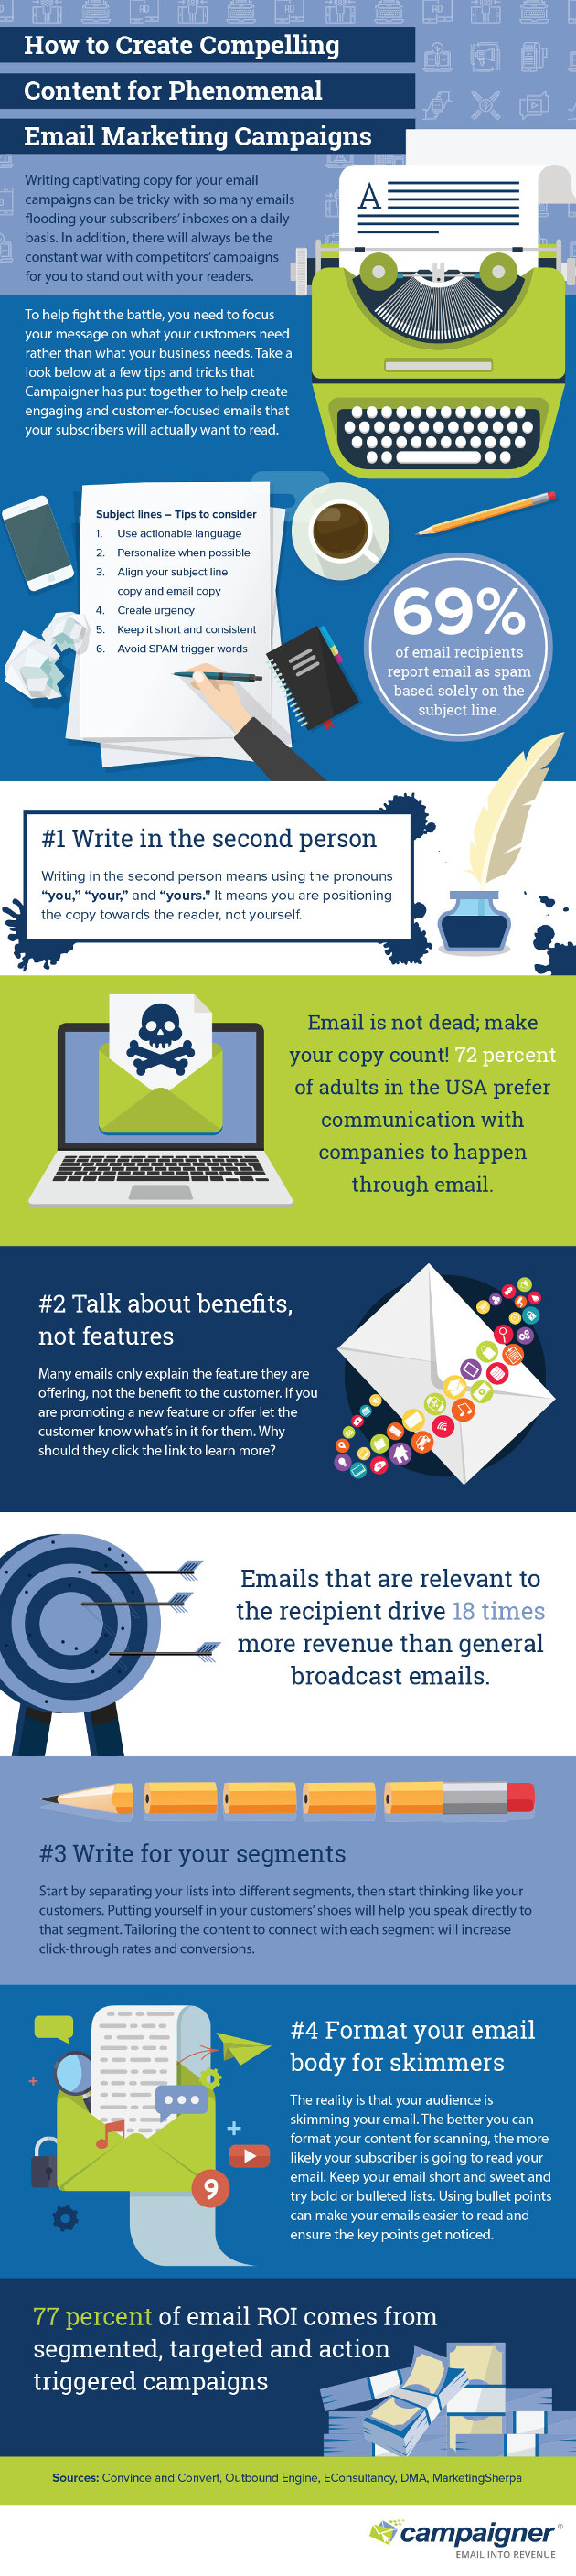 How to Write Compelling Email Content Customers Want to Read 